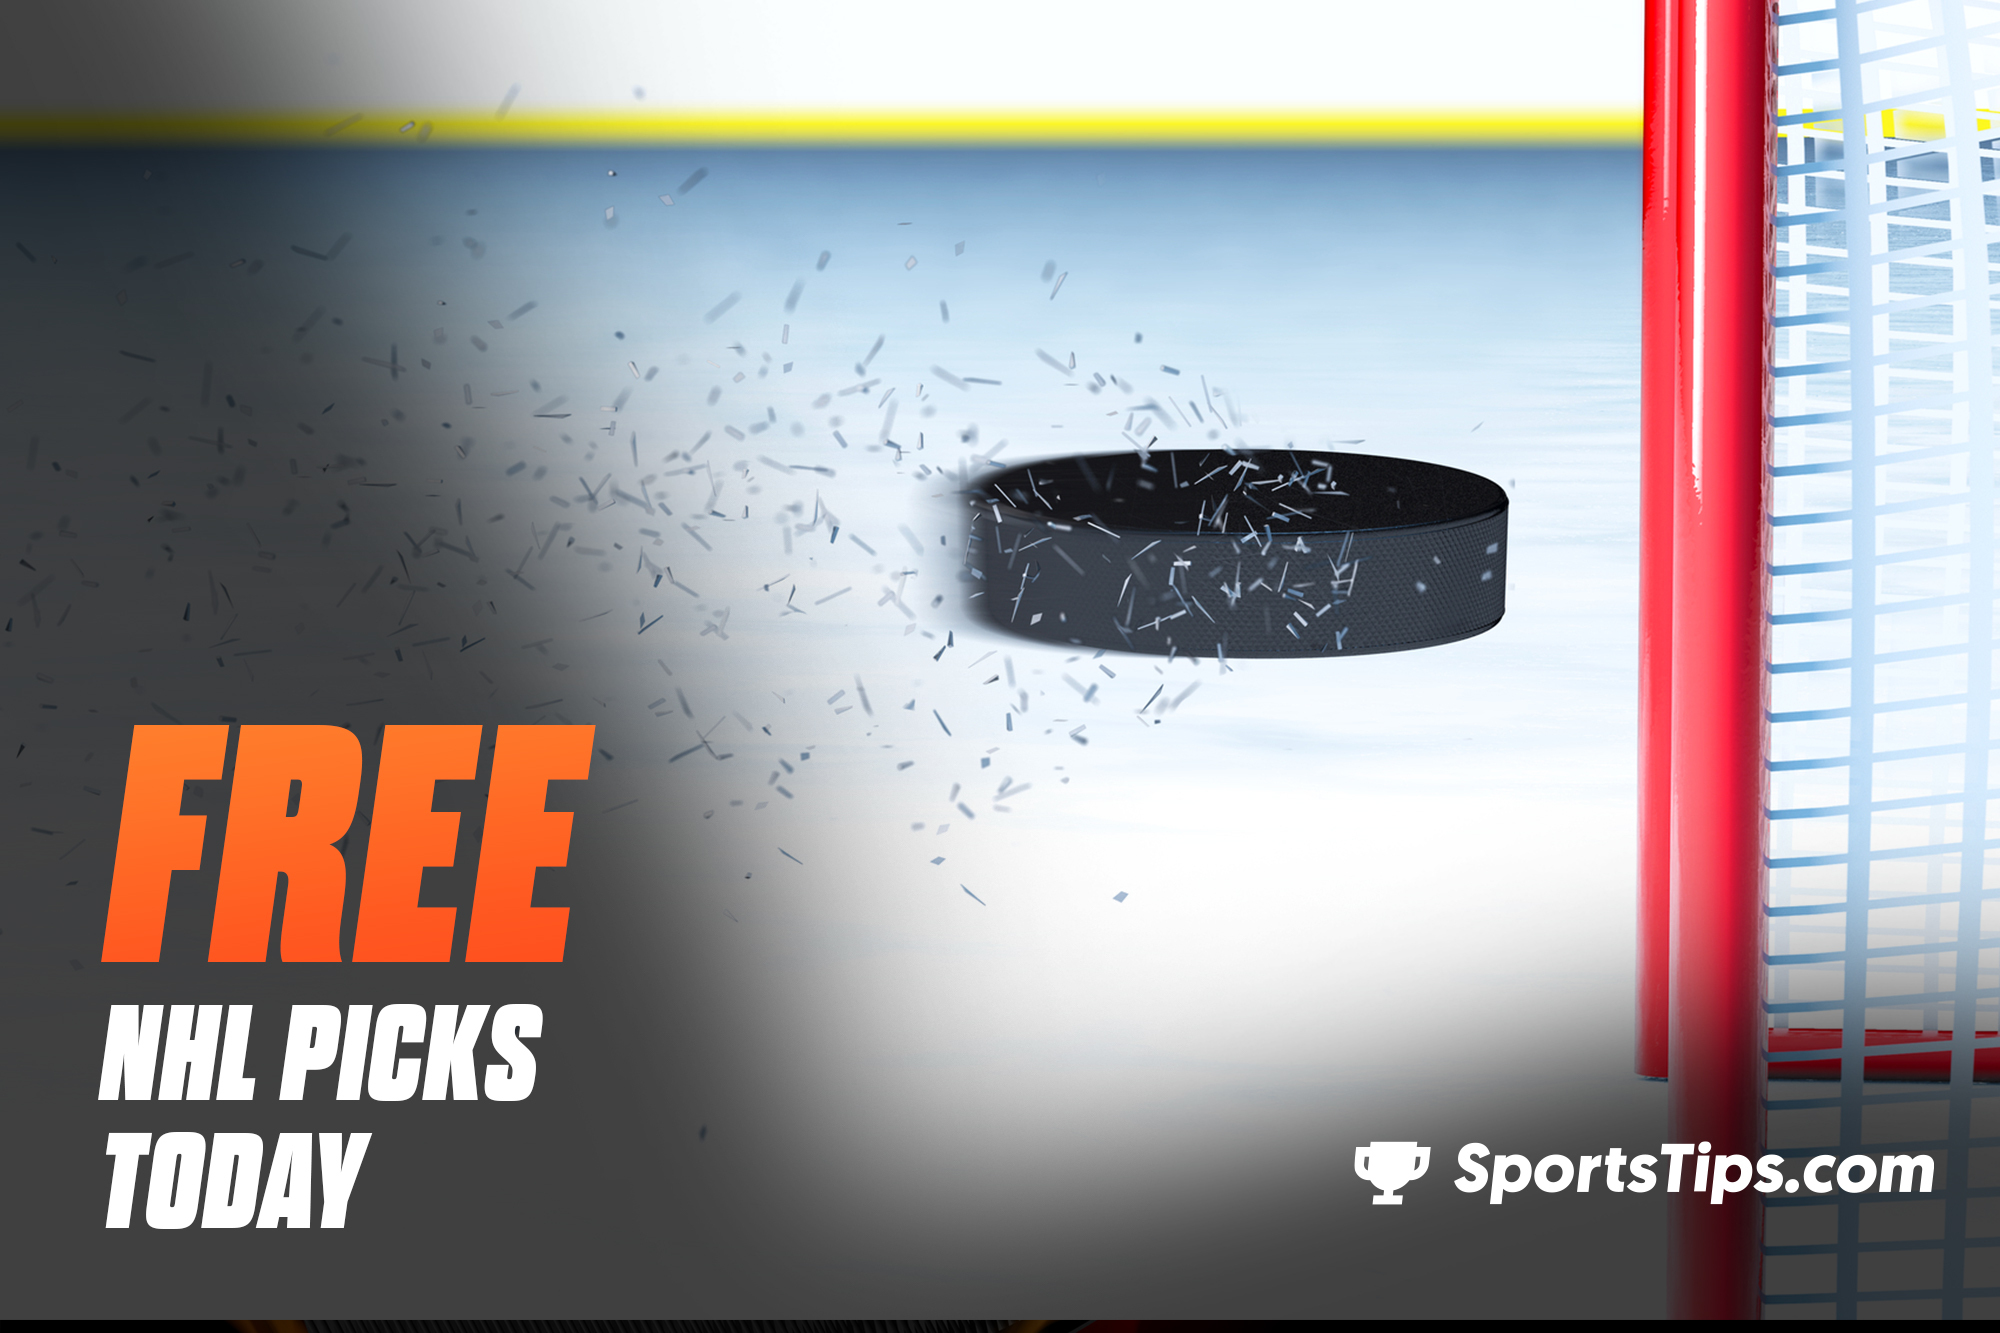 NHL Playoffs Semi Finals: Free NHL Picks Today for Tuesday, June 22nd, 2021